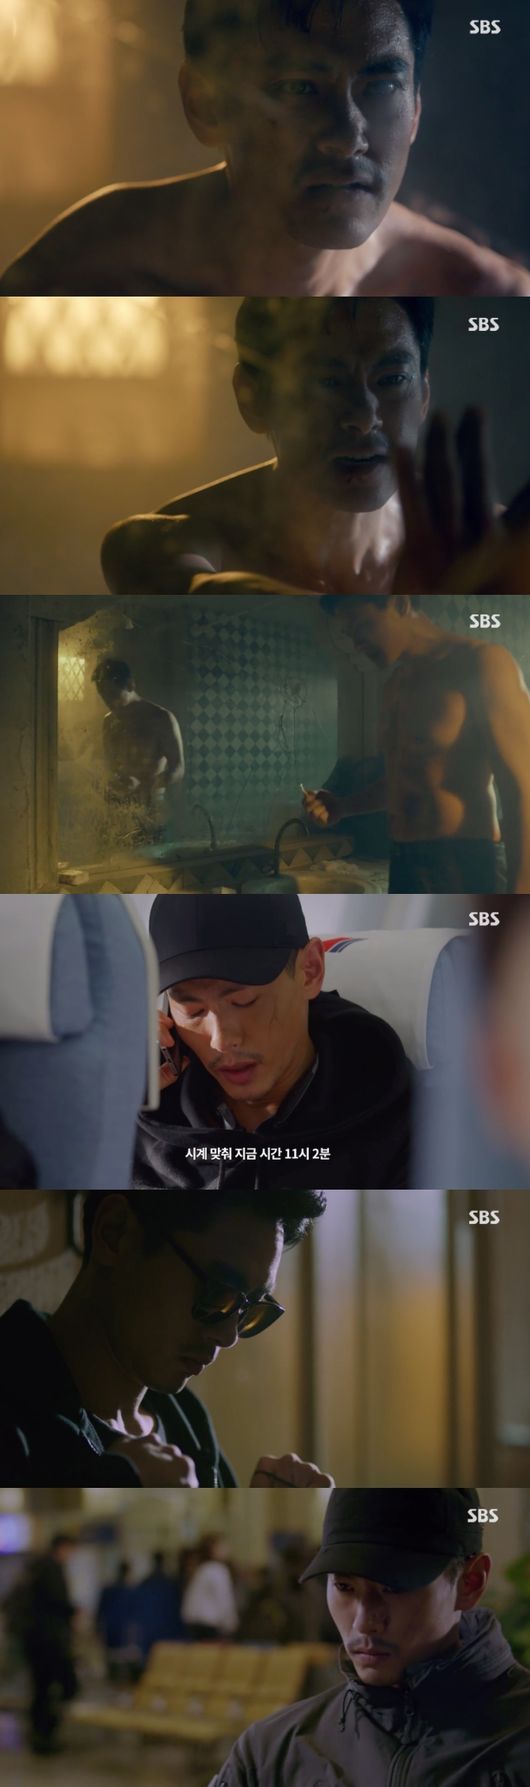 Vagabond Teo Yoo stepped out to Churdan himself, wary of Lee Seung-gi, who knows he is a Terrorists.In the second episode of SBS gilt drama Vagabond (playplayed by Jang Young-chul, Jung Kyung-soon, and directed by Yoo In-sik), which was broadcast on the 21st, Cha Dal-gun (Lee Seung-gi) made a plan to catch Terorists (Teo Yoo) with the help of NIS agent Go Hae-ri (Bae Suzy).Earlier, Chadal Gun saw the face of Terrorists in a video he had filmed inside the Planes to Morocco before his nephew died.The bereaved families and Chadalgan, who arrived at Morocco, confirmed the survival of Terrorists at Tangier International Airport and were convinced of the terrorist attacks.Vagabond is an intelligence action drama that uncovers the corruption of the Korean government that was found in the concealed truth of Cha Dal-gun involved in the crash of a civil passenger plane.Planes is down, and theres a man alive. He shot me.Ive seen him, Ive seen him, he said, appealing to the families of the B357 crash, and reiterated, Im not crazy, Im sober.At the same time, Terrorists hid themselves in a secret residence to treat injuries sustained in their fight against Chadalgan.He laughed at the same teammate when he learned that Cha Dal-geon was a stuntman in Korea.He ignored his bosss call to return to the country, saying, Honor is more important than my life. He planned to take Chardan himself, saying, I know someone who can help me.It meant that he would hide the fact that he was a Terrorists by removing his own hand and restore his honor to the physical damage.When Cha Dal-geon found out that Ko Hae-ri was a member of the NIS of the Republic of Korea, he asked her to help him as a working officer.The video of the blog I shared with my nephew was completely deleted, and the luggage of the hostel was also robbed.While Gohari went to see Chadalgan, Terrorists trespassed into Harrys room and was devastated to see himself in the video of his nephew.Arriving at the International Civil Aviation Organization, the confession was convinced that the Terrorists were terrorists, inferring that they had spoken to the B357s deputy director in Spanish on the day of the incident.Capture the Vagabond broadcast screen